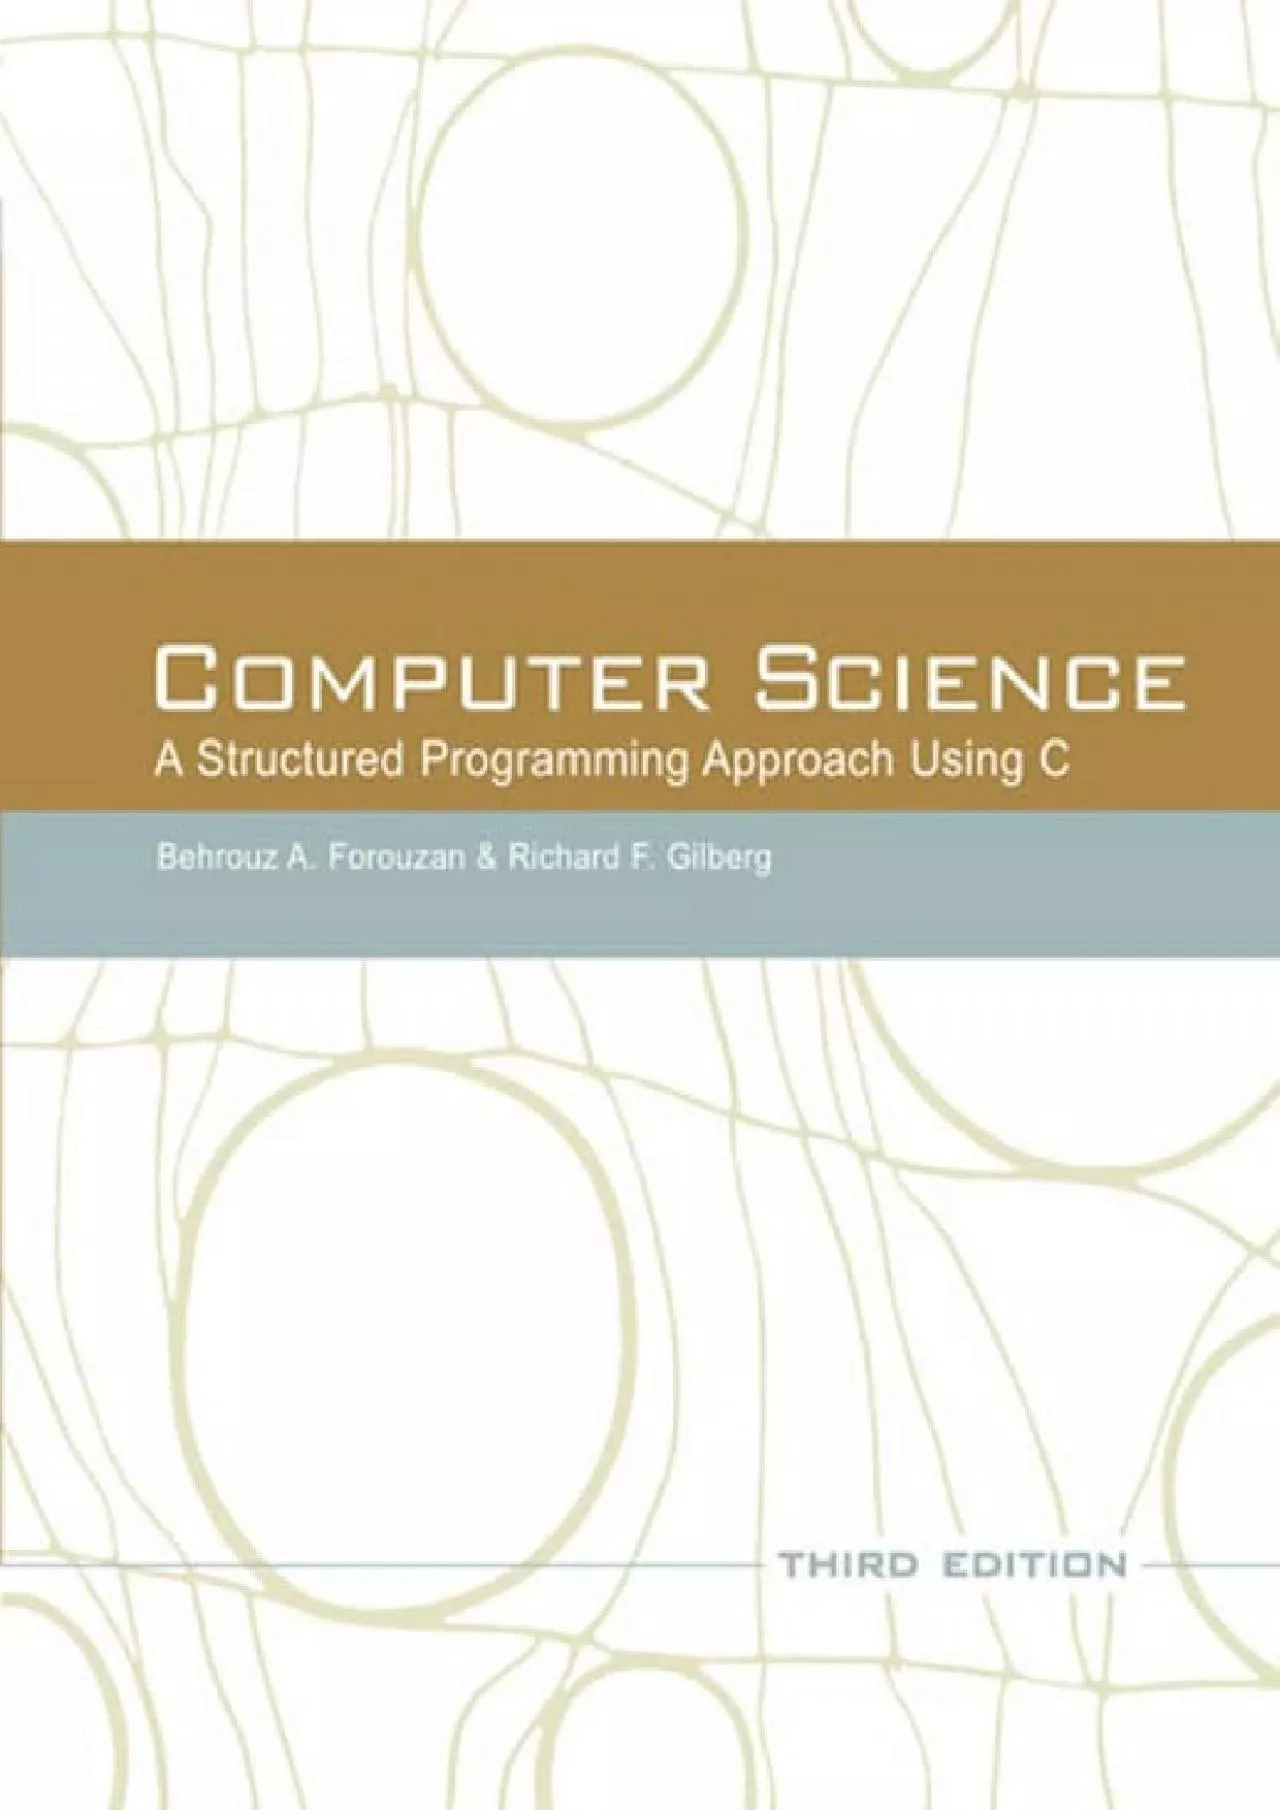 [BEST]-Computer Science: A Structured Programming Approach Using C (3rd Edition)